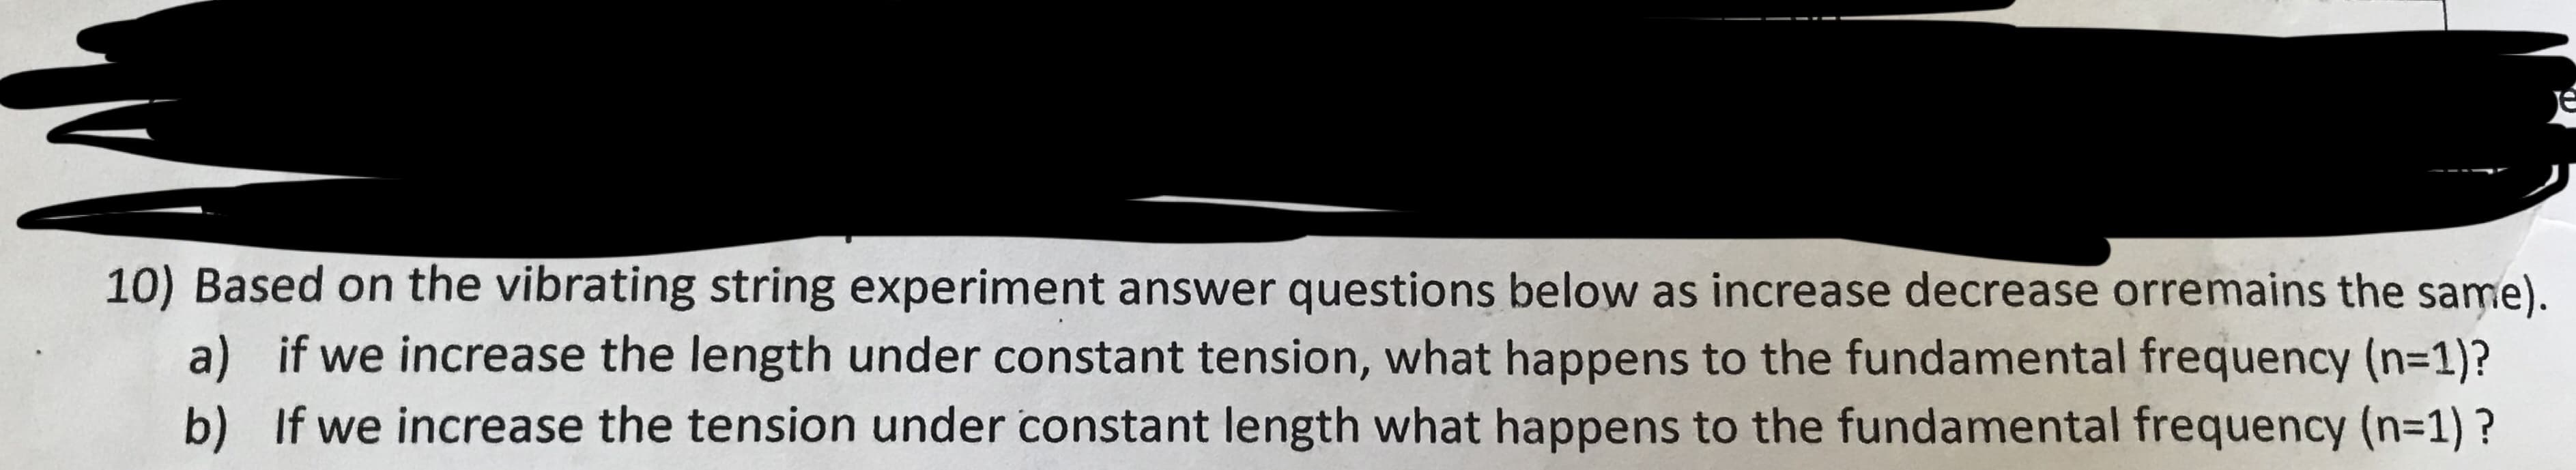 10) Based on the vibrating string experiment answer questions below as increase decrease orremains the same).
a) if we increase the length under constant tension, what happens to the fundamental frequency (n-1)?
b) If we increase the tension under constant length what happens to the fundamental frequency (n=1)?
